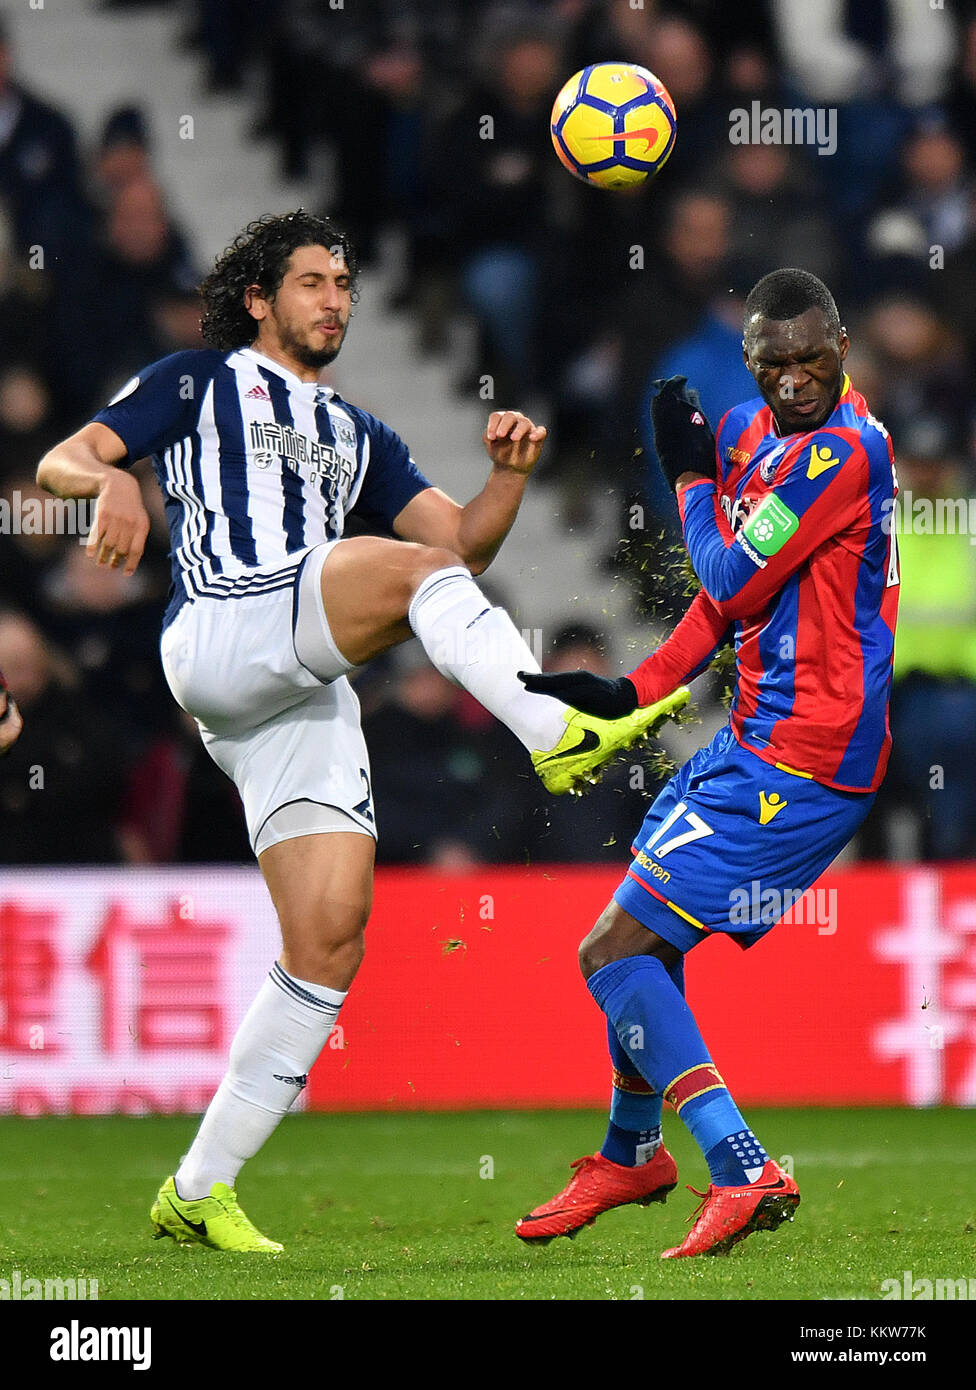 West Bromwich Albion's Ahmed Hegazy (left) and Crystal Palace's Christian Benteke battle for the ball during the Premier League match at The Hawthorns, West Bromwich. PRESS ASSOCIATION Photo Picture date: Saturday December 2, 2017. See PA story SOCCER WBA. Photo credit should read: Anthony Devlin/PA Wire. RESTRICTIONS: No use with unauthorised audio, video, data, fixture lists, club/league logos or 'live' services. Online in-match use limited to 75 images, no video emulation. No use in betting, games or single club/league/player publications. Stock Photo